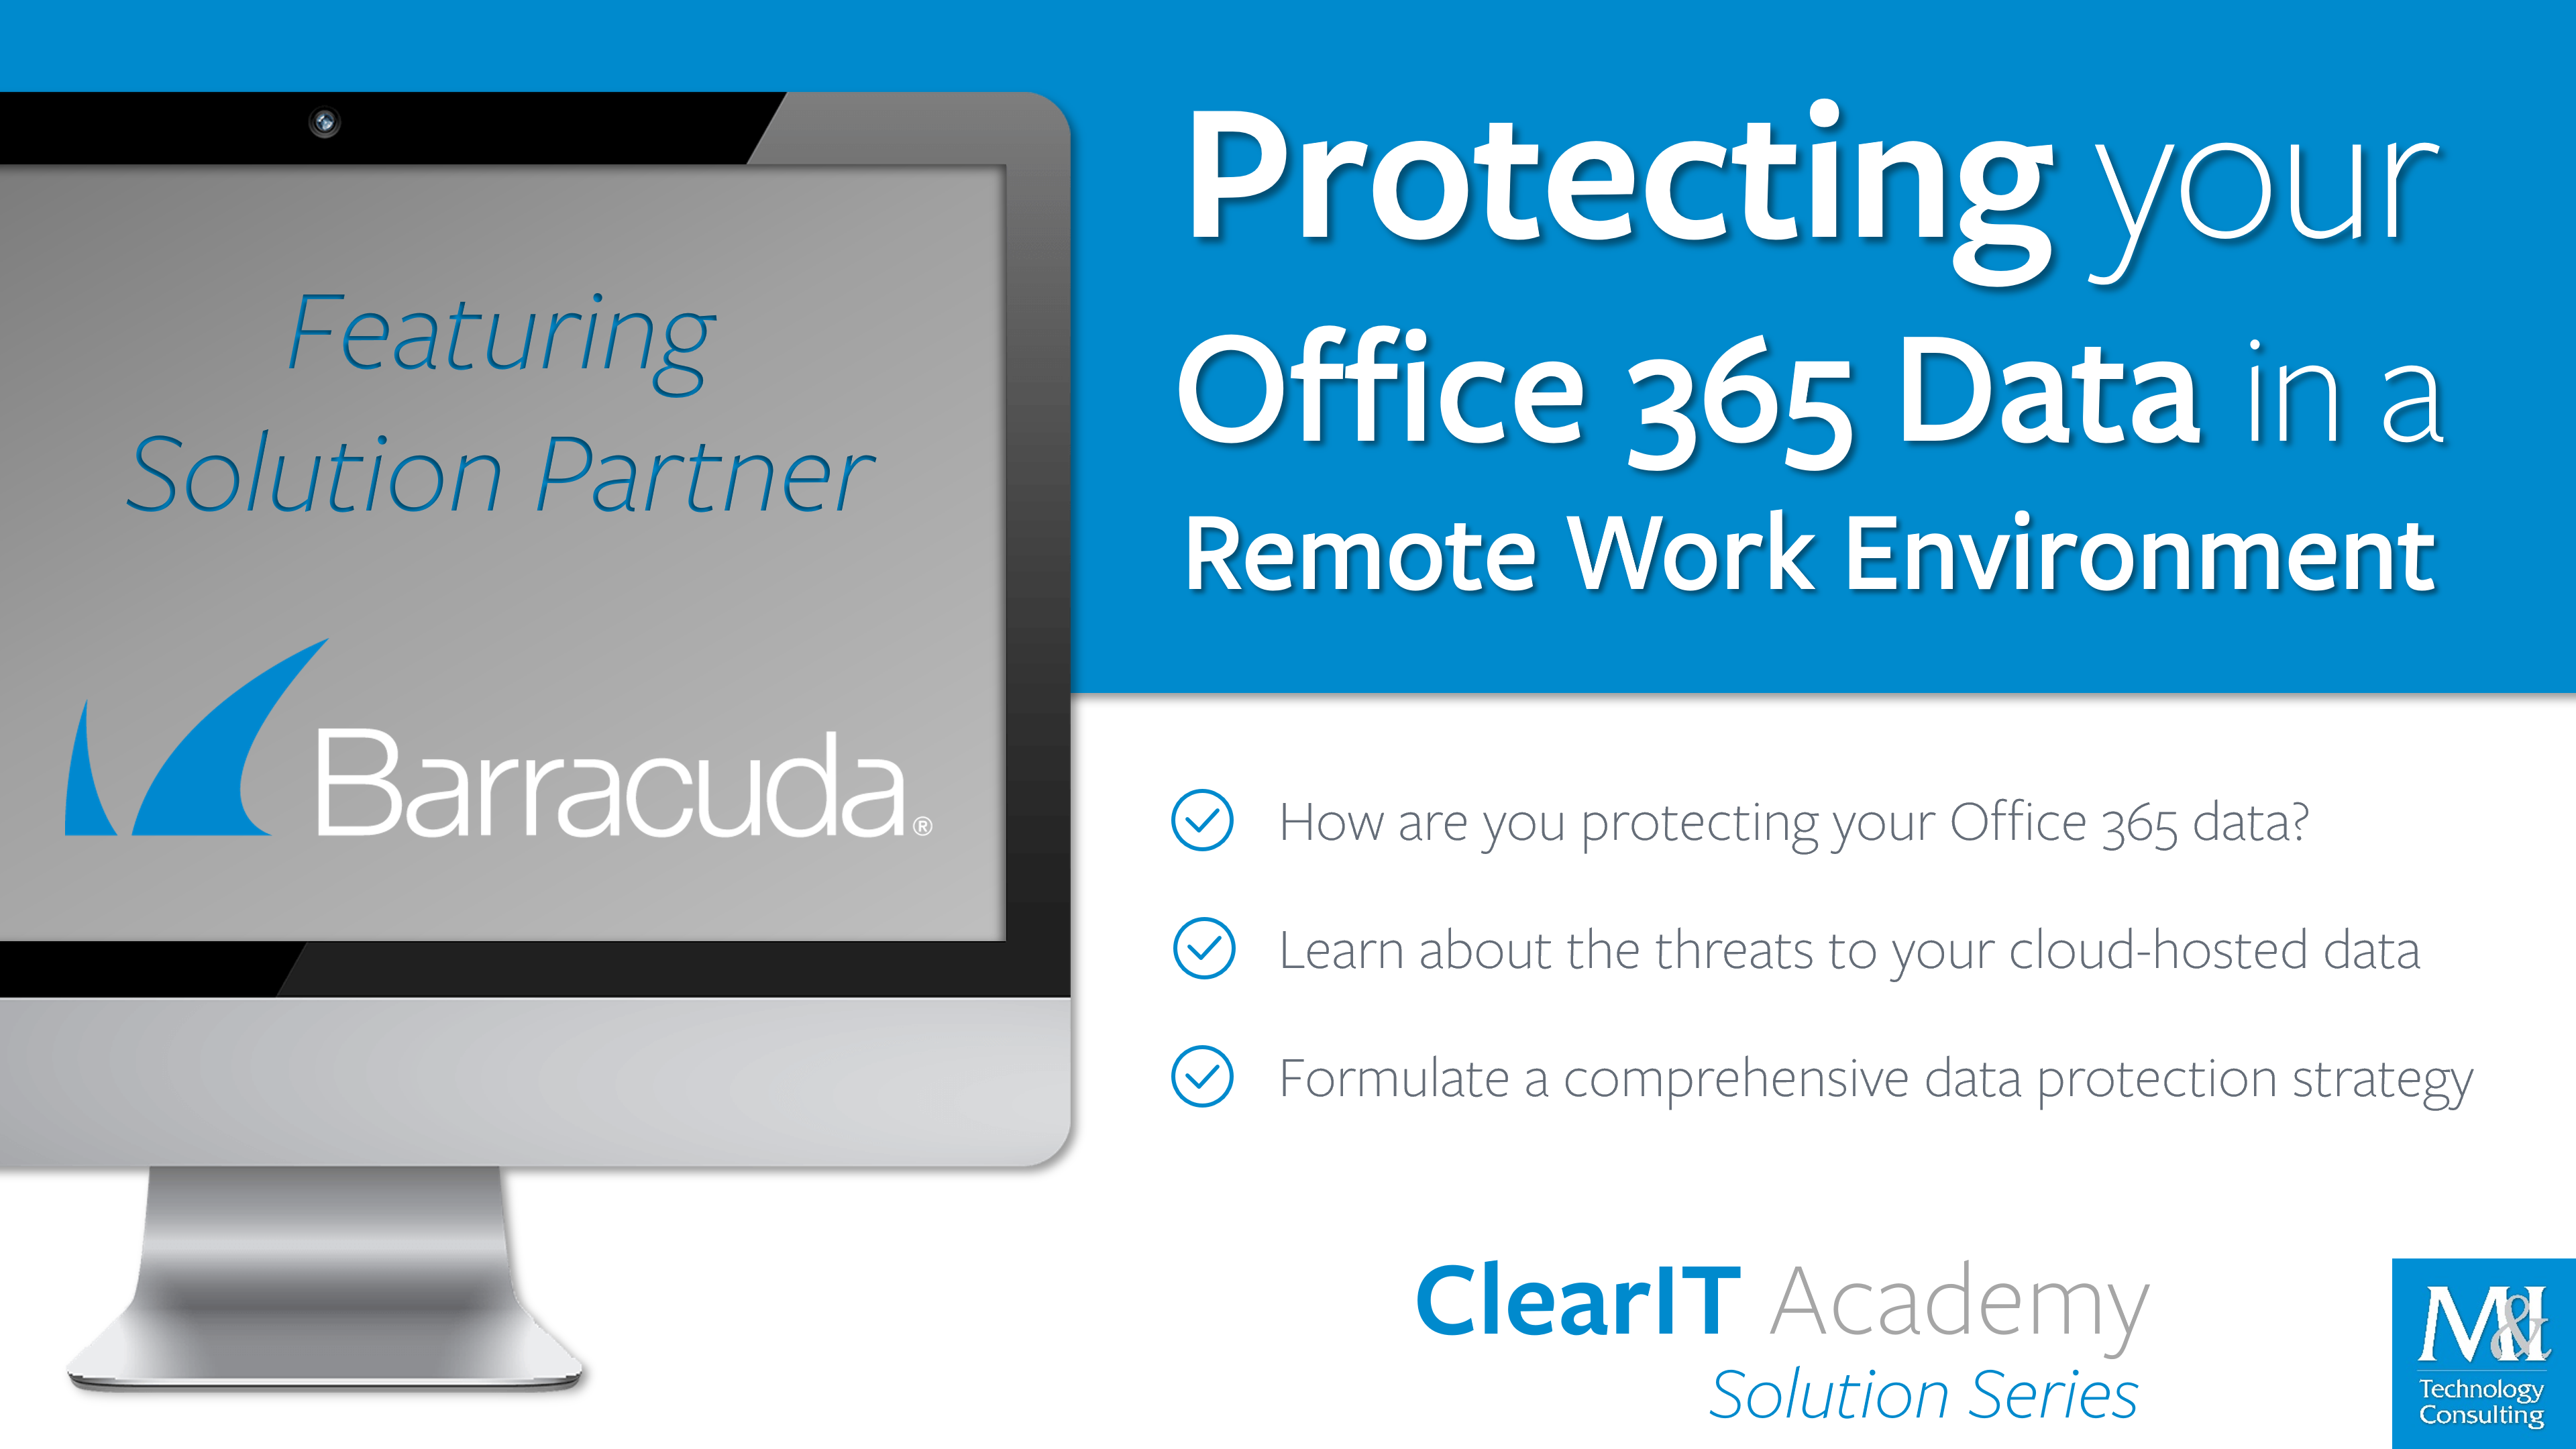 clearit-academy-barracuda-solution-series-title-slide